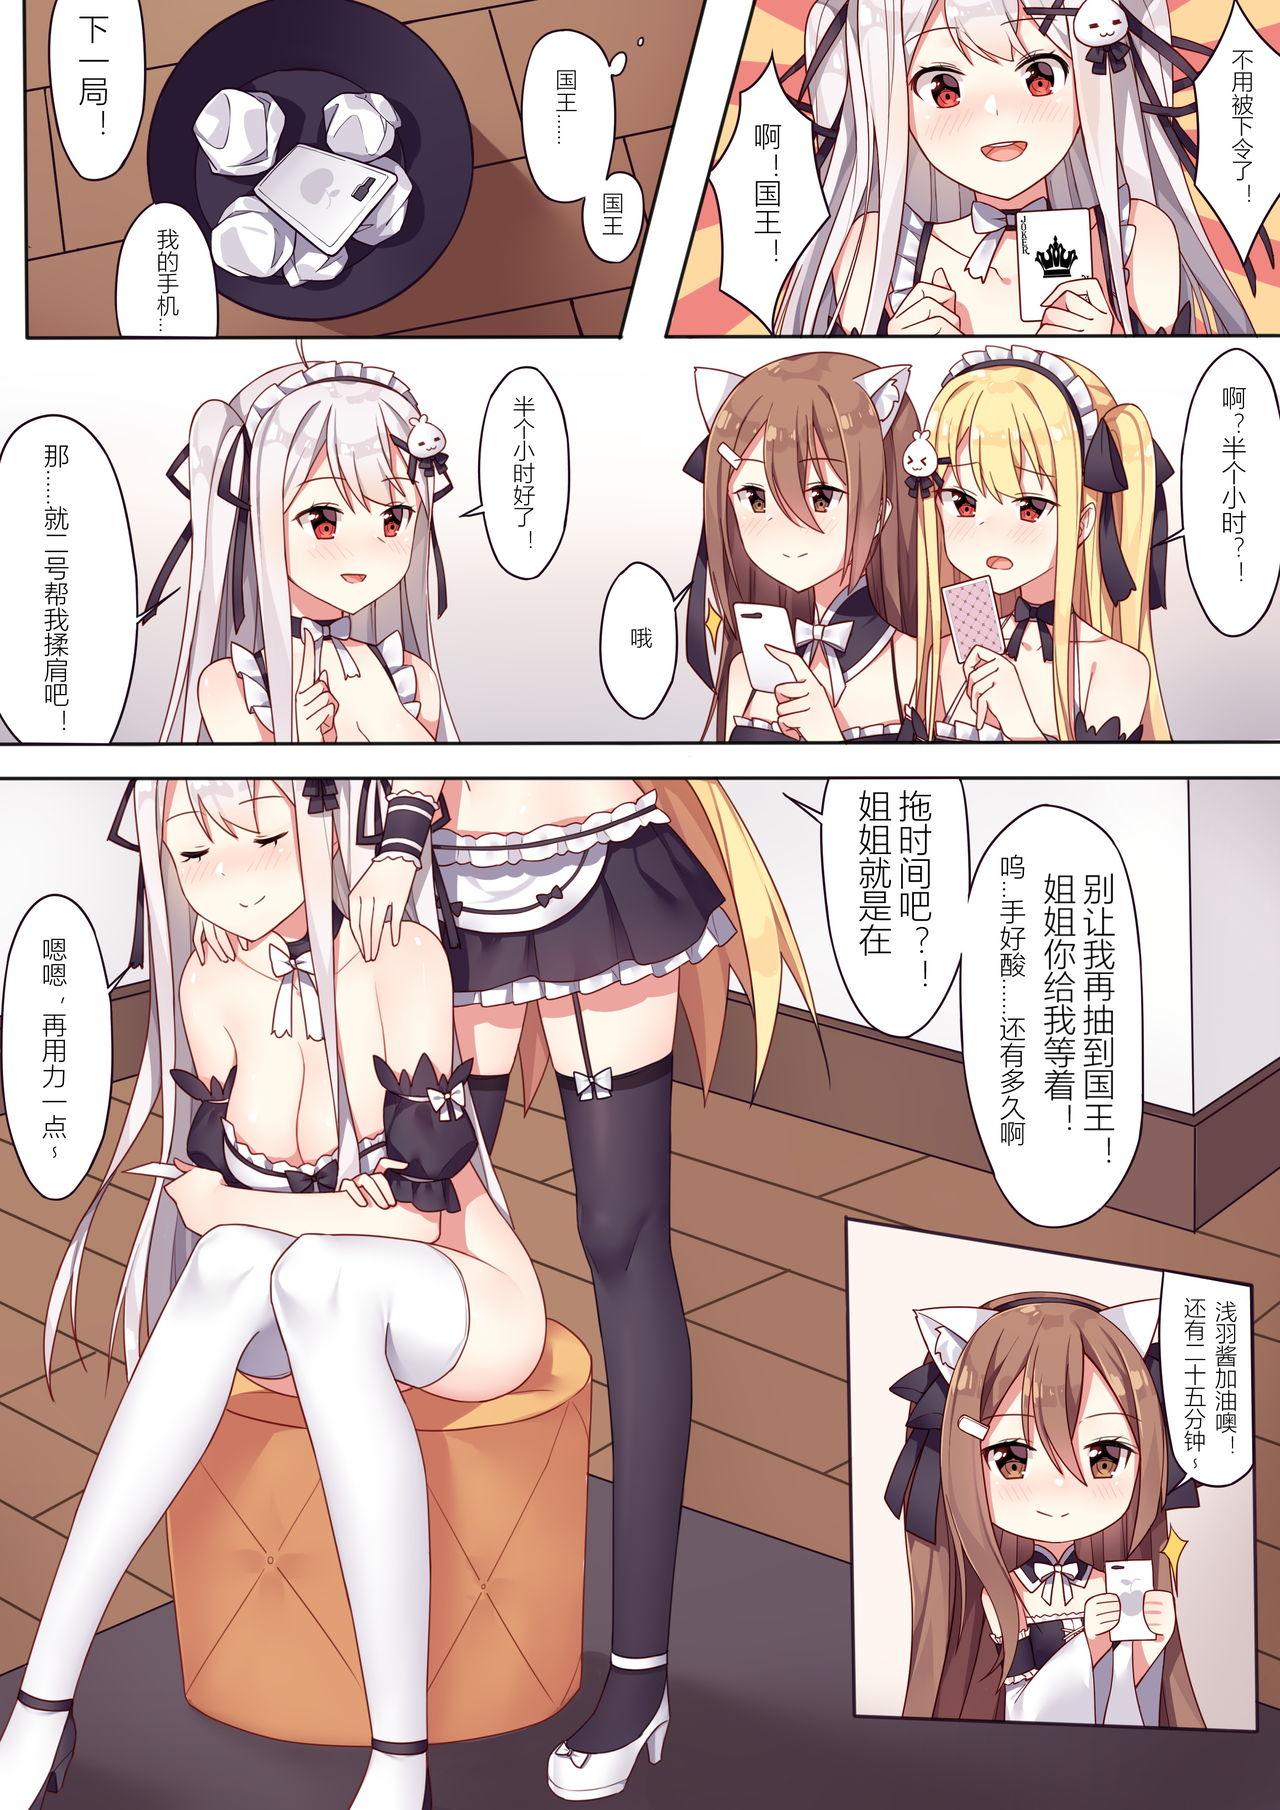 With 少女与国王的茶会 - Original Double Penetration - Page 7